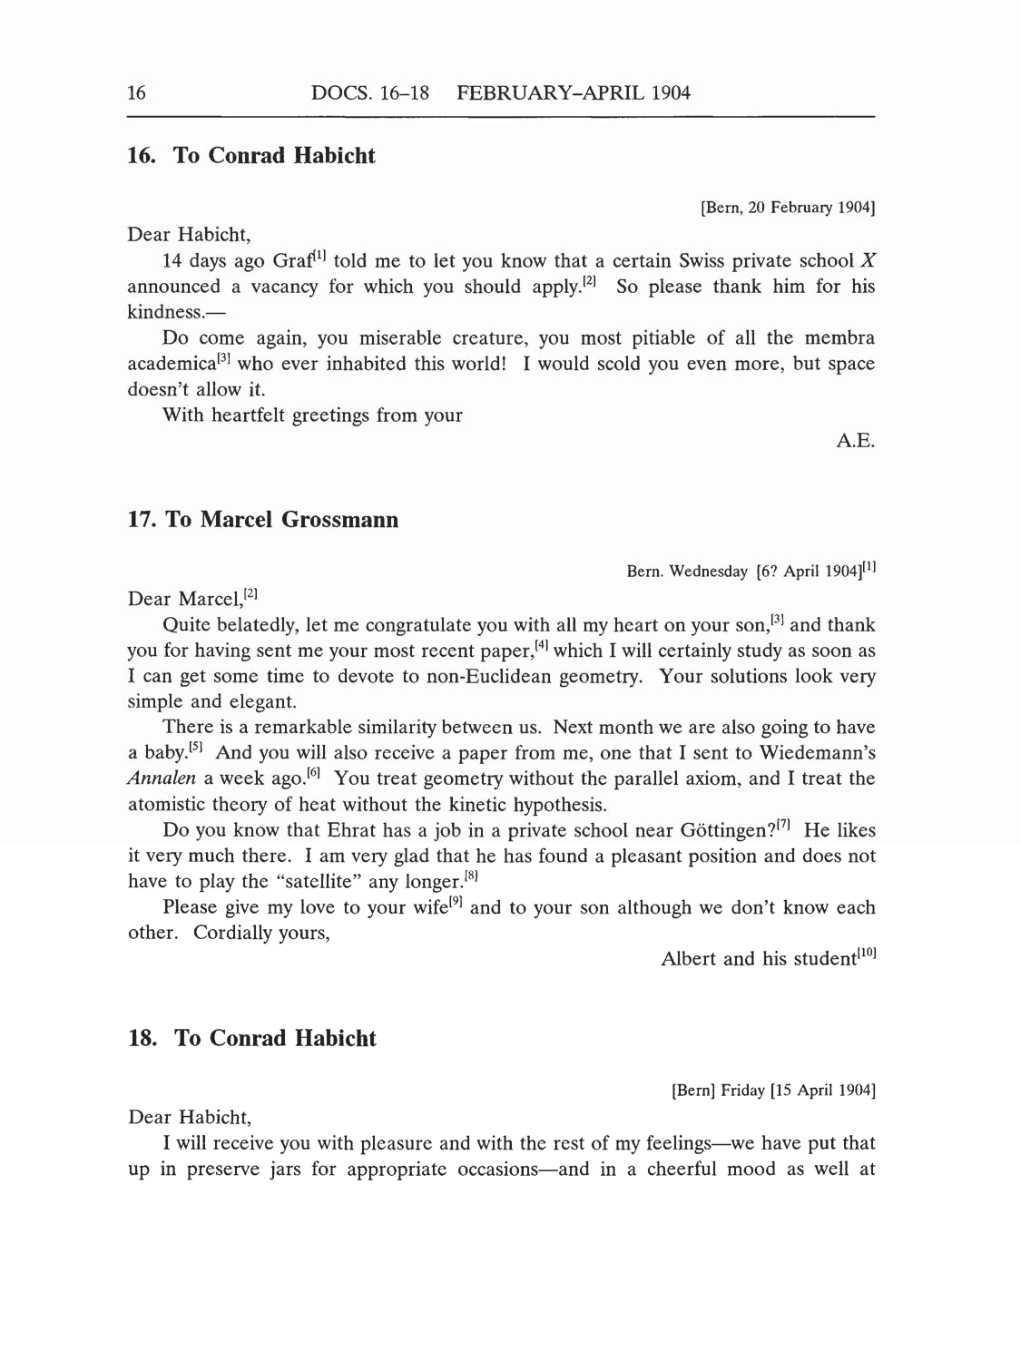 Volume 5: The Swiss Years: Correspondence, 1902-1914 (English translation supplement) page 16